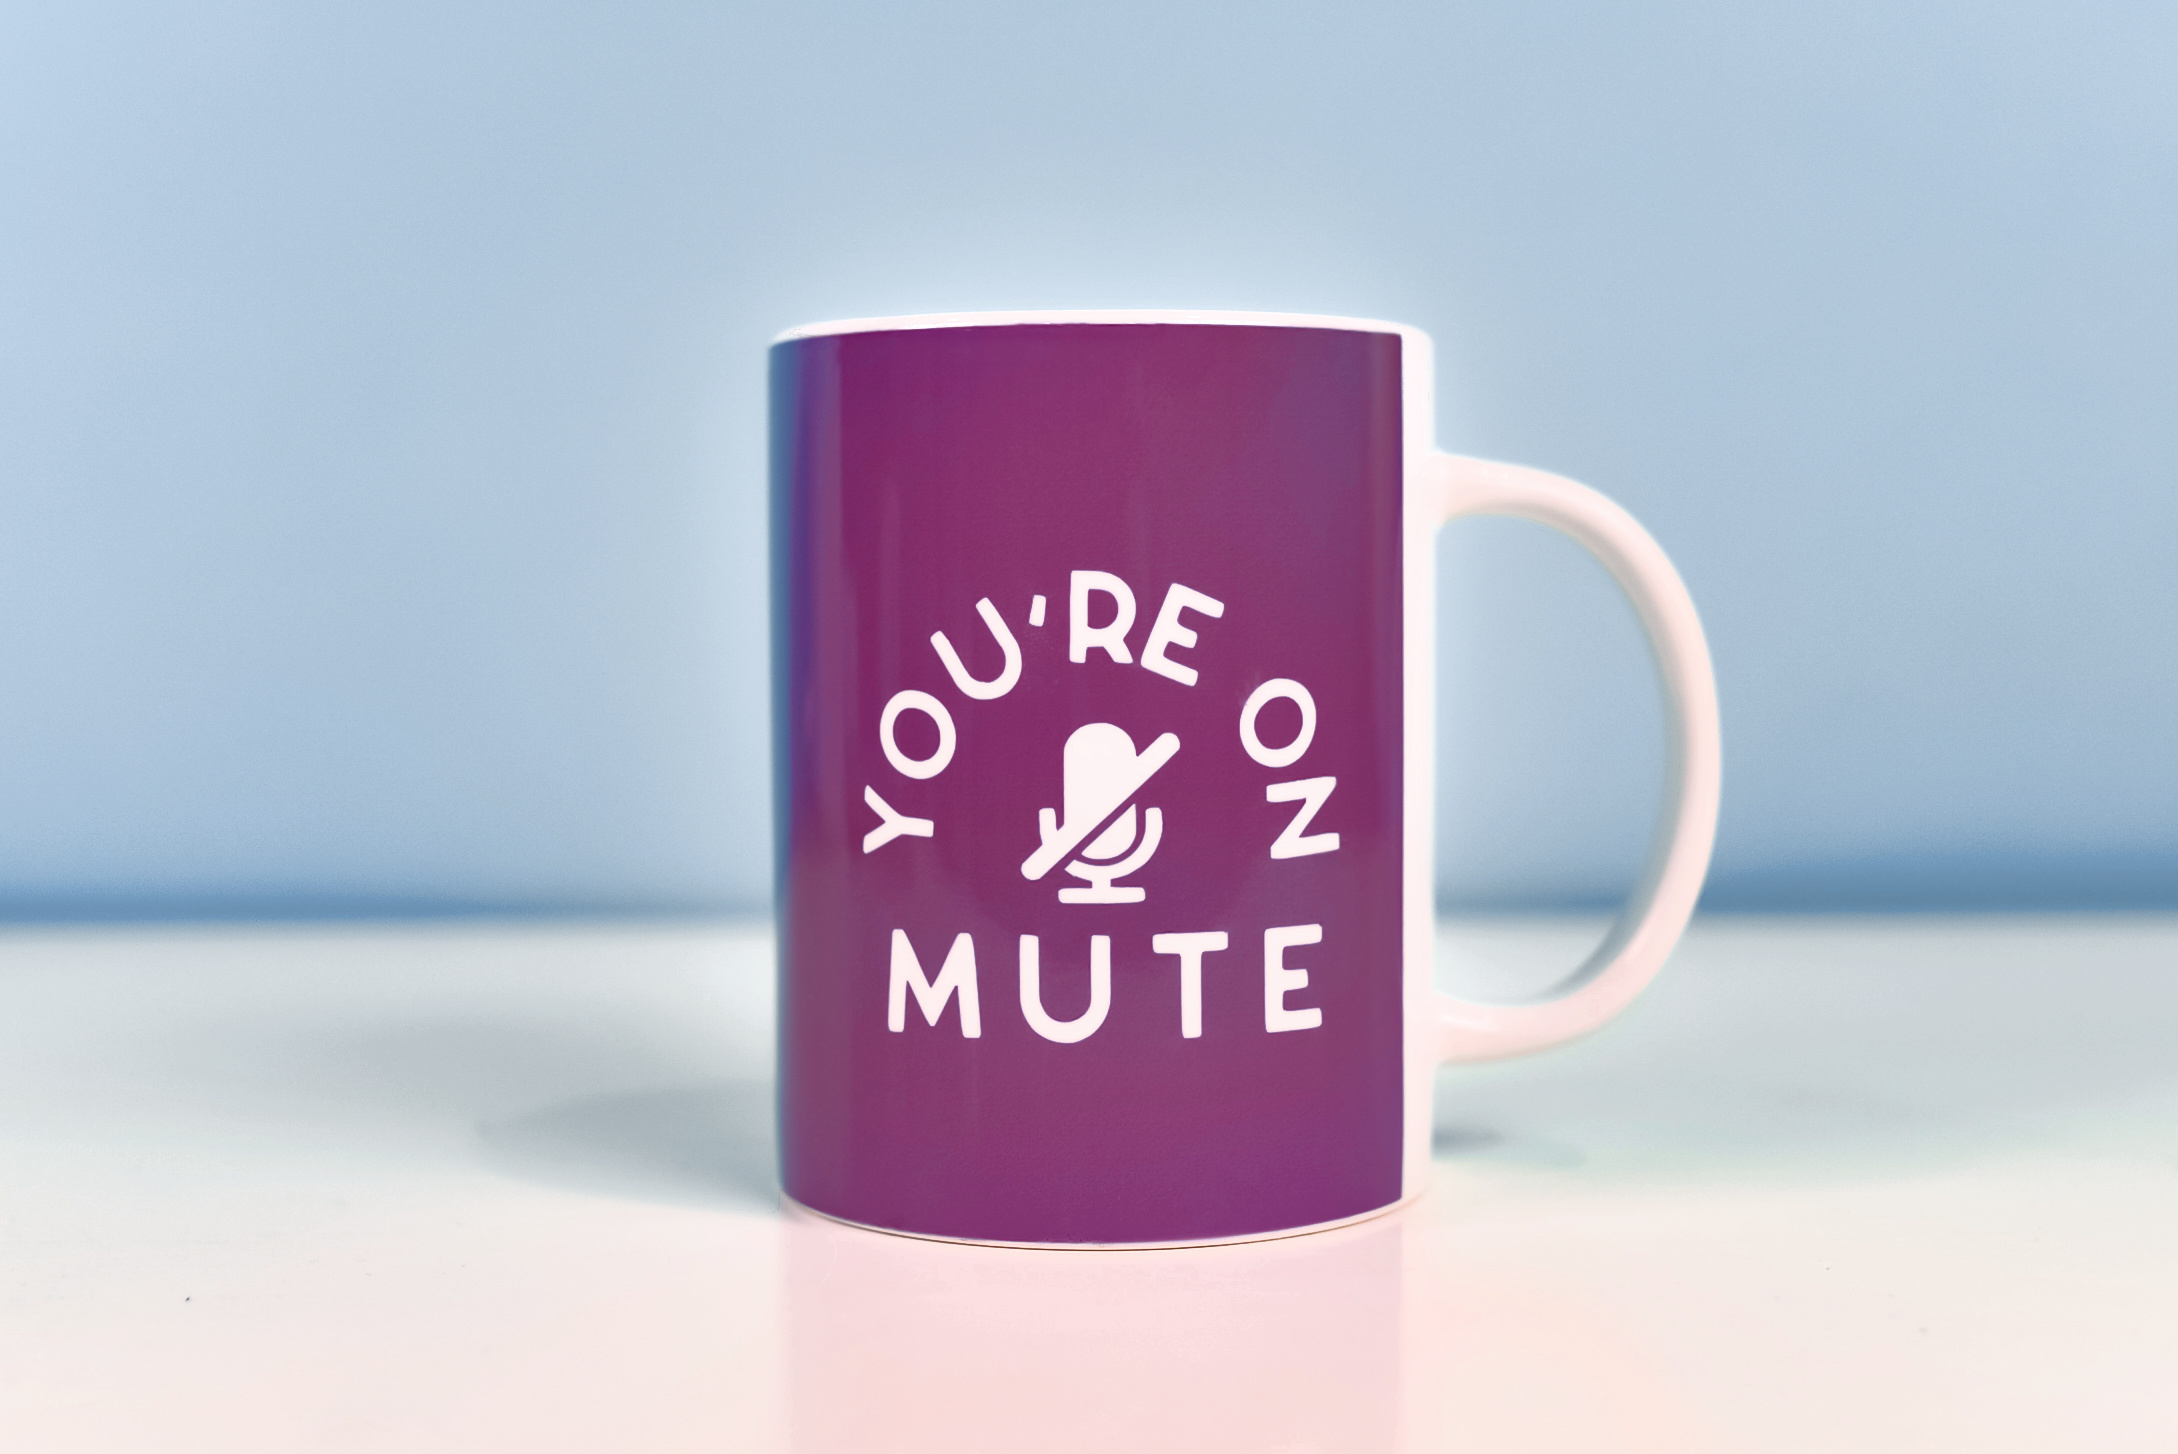 You're on Mute mug with a blue background